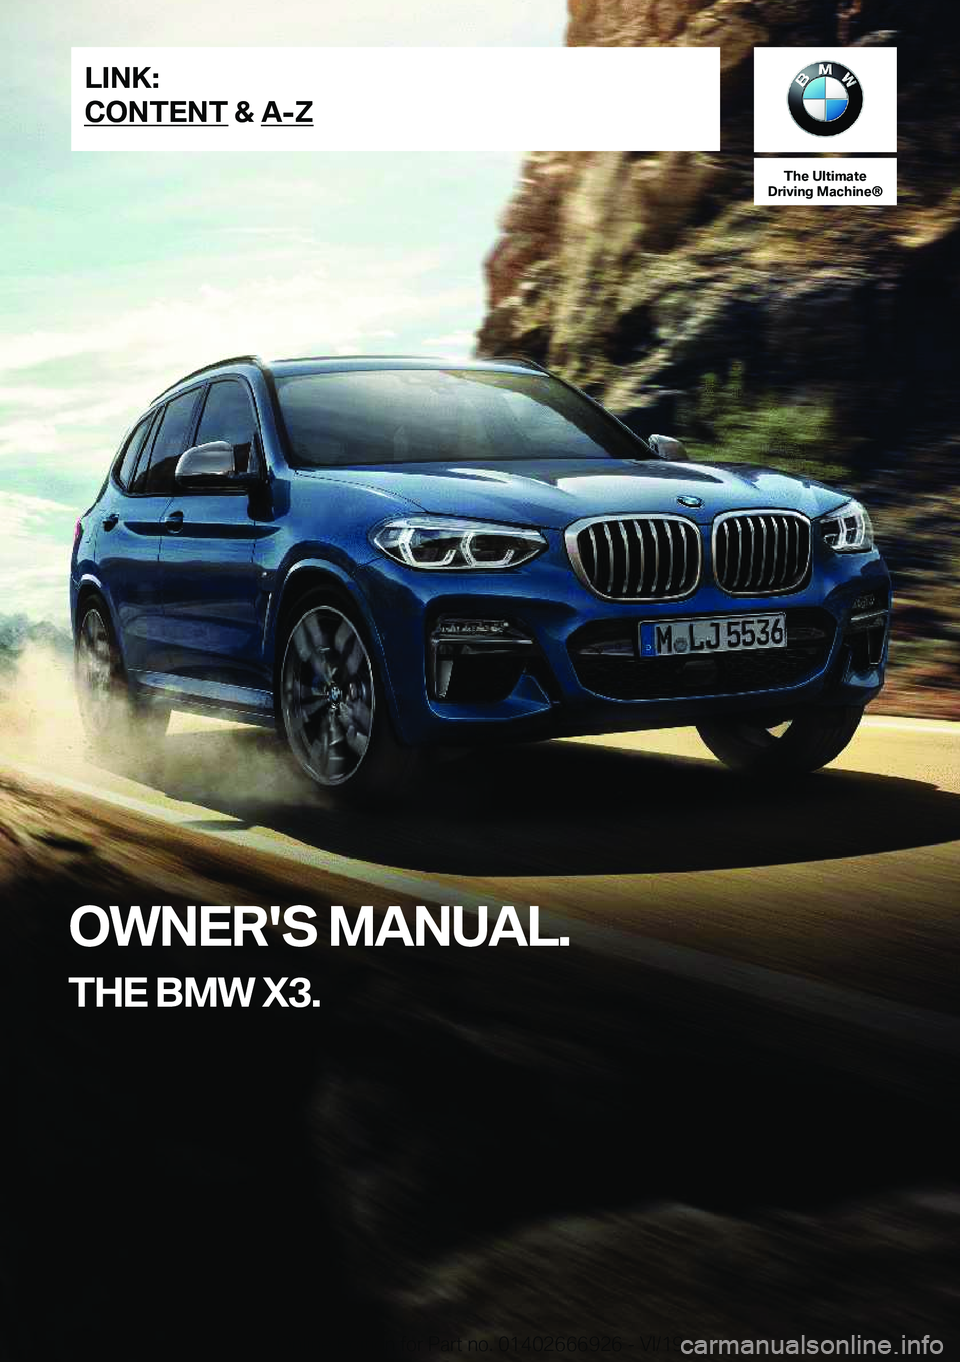 BMW X3 2020  Owners Manual �T�h�e��U�l�t�i�m�a�t�e
�D�r�i�v�i�n�g��M�a�c�h�i�n�e�n
�O�W�N�E�R�'�S��M�A�N�U�A�L�.
�T�H�E��B�M�W��X�3�.�L�I�N�K�:
�C�O�N�T�E�N�T��&��A�-�Z�O�n�l�i�n�e��E�d�i�t�i�o�n��f�o�r��P�a�r�t�